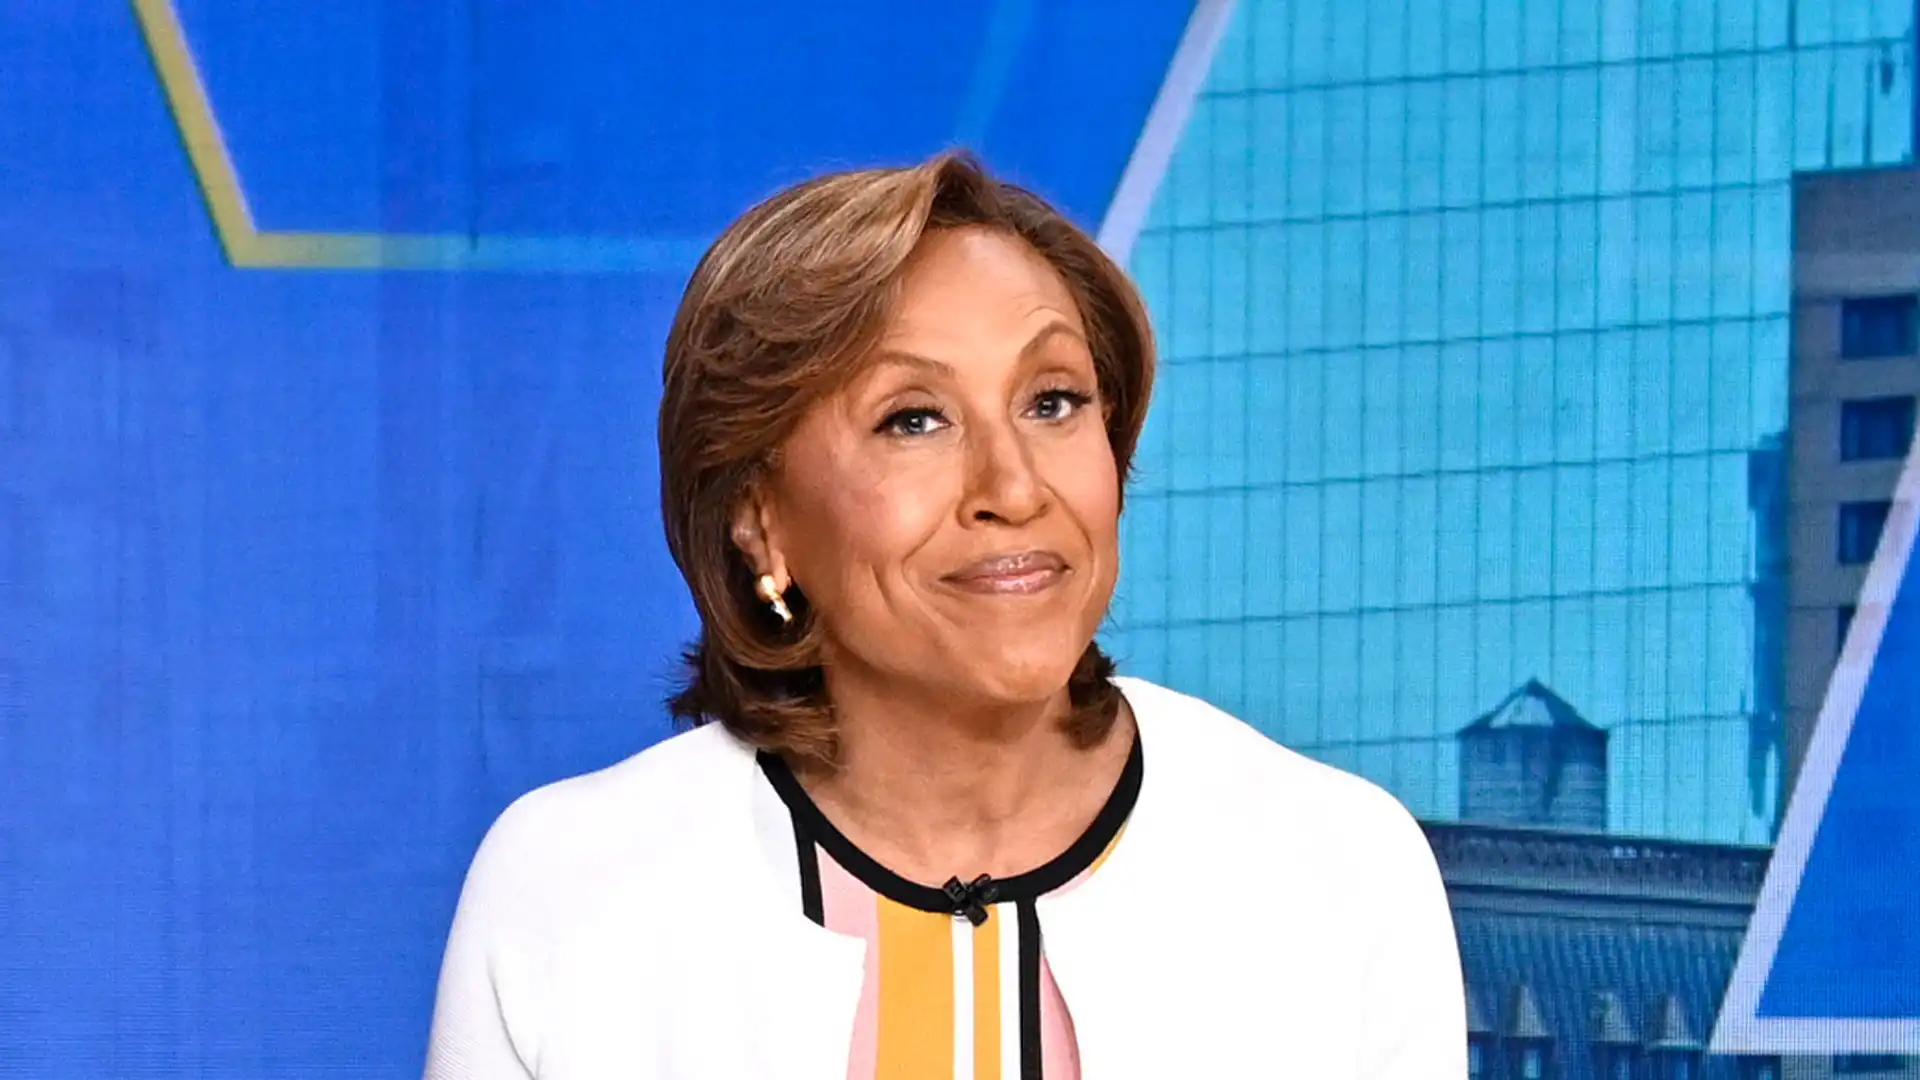 Robin Roberts: Recent Absence from GMA - It's OK Not to be OK